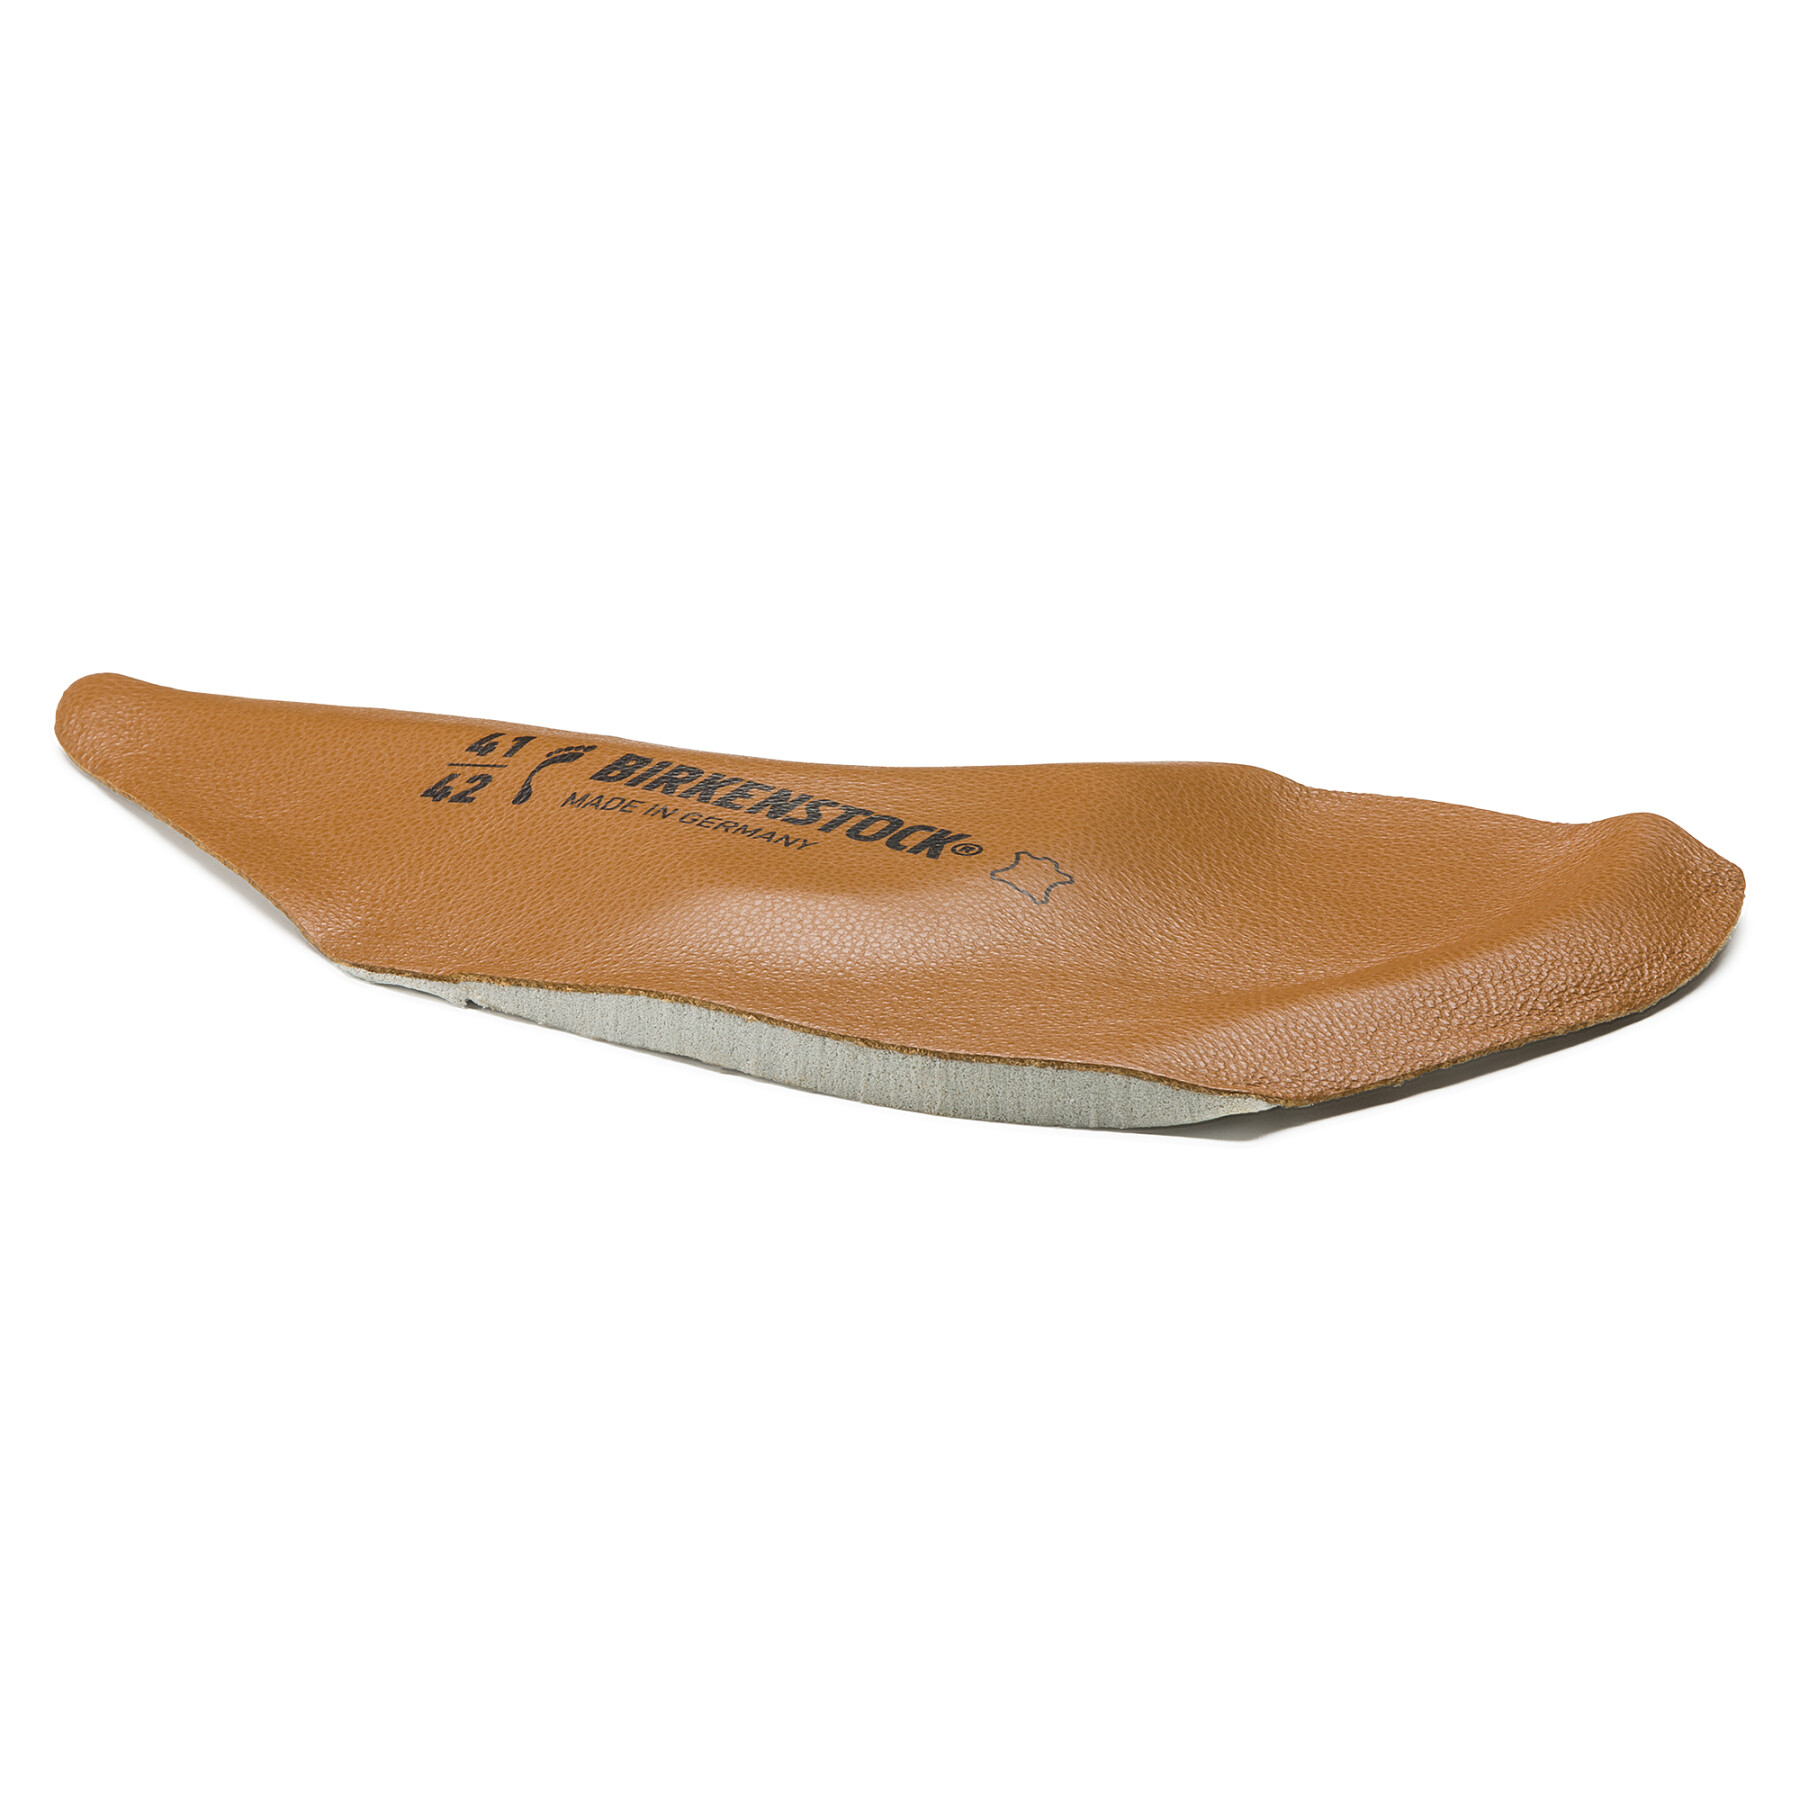 Suole strette Birkenstock Star Leather Lined Natural Leather